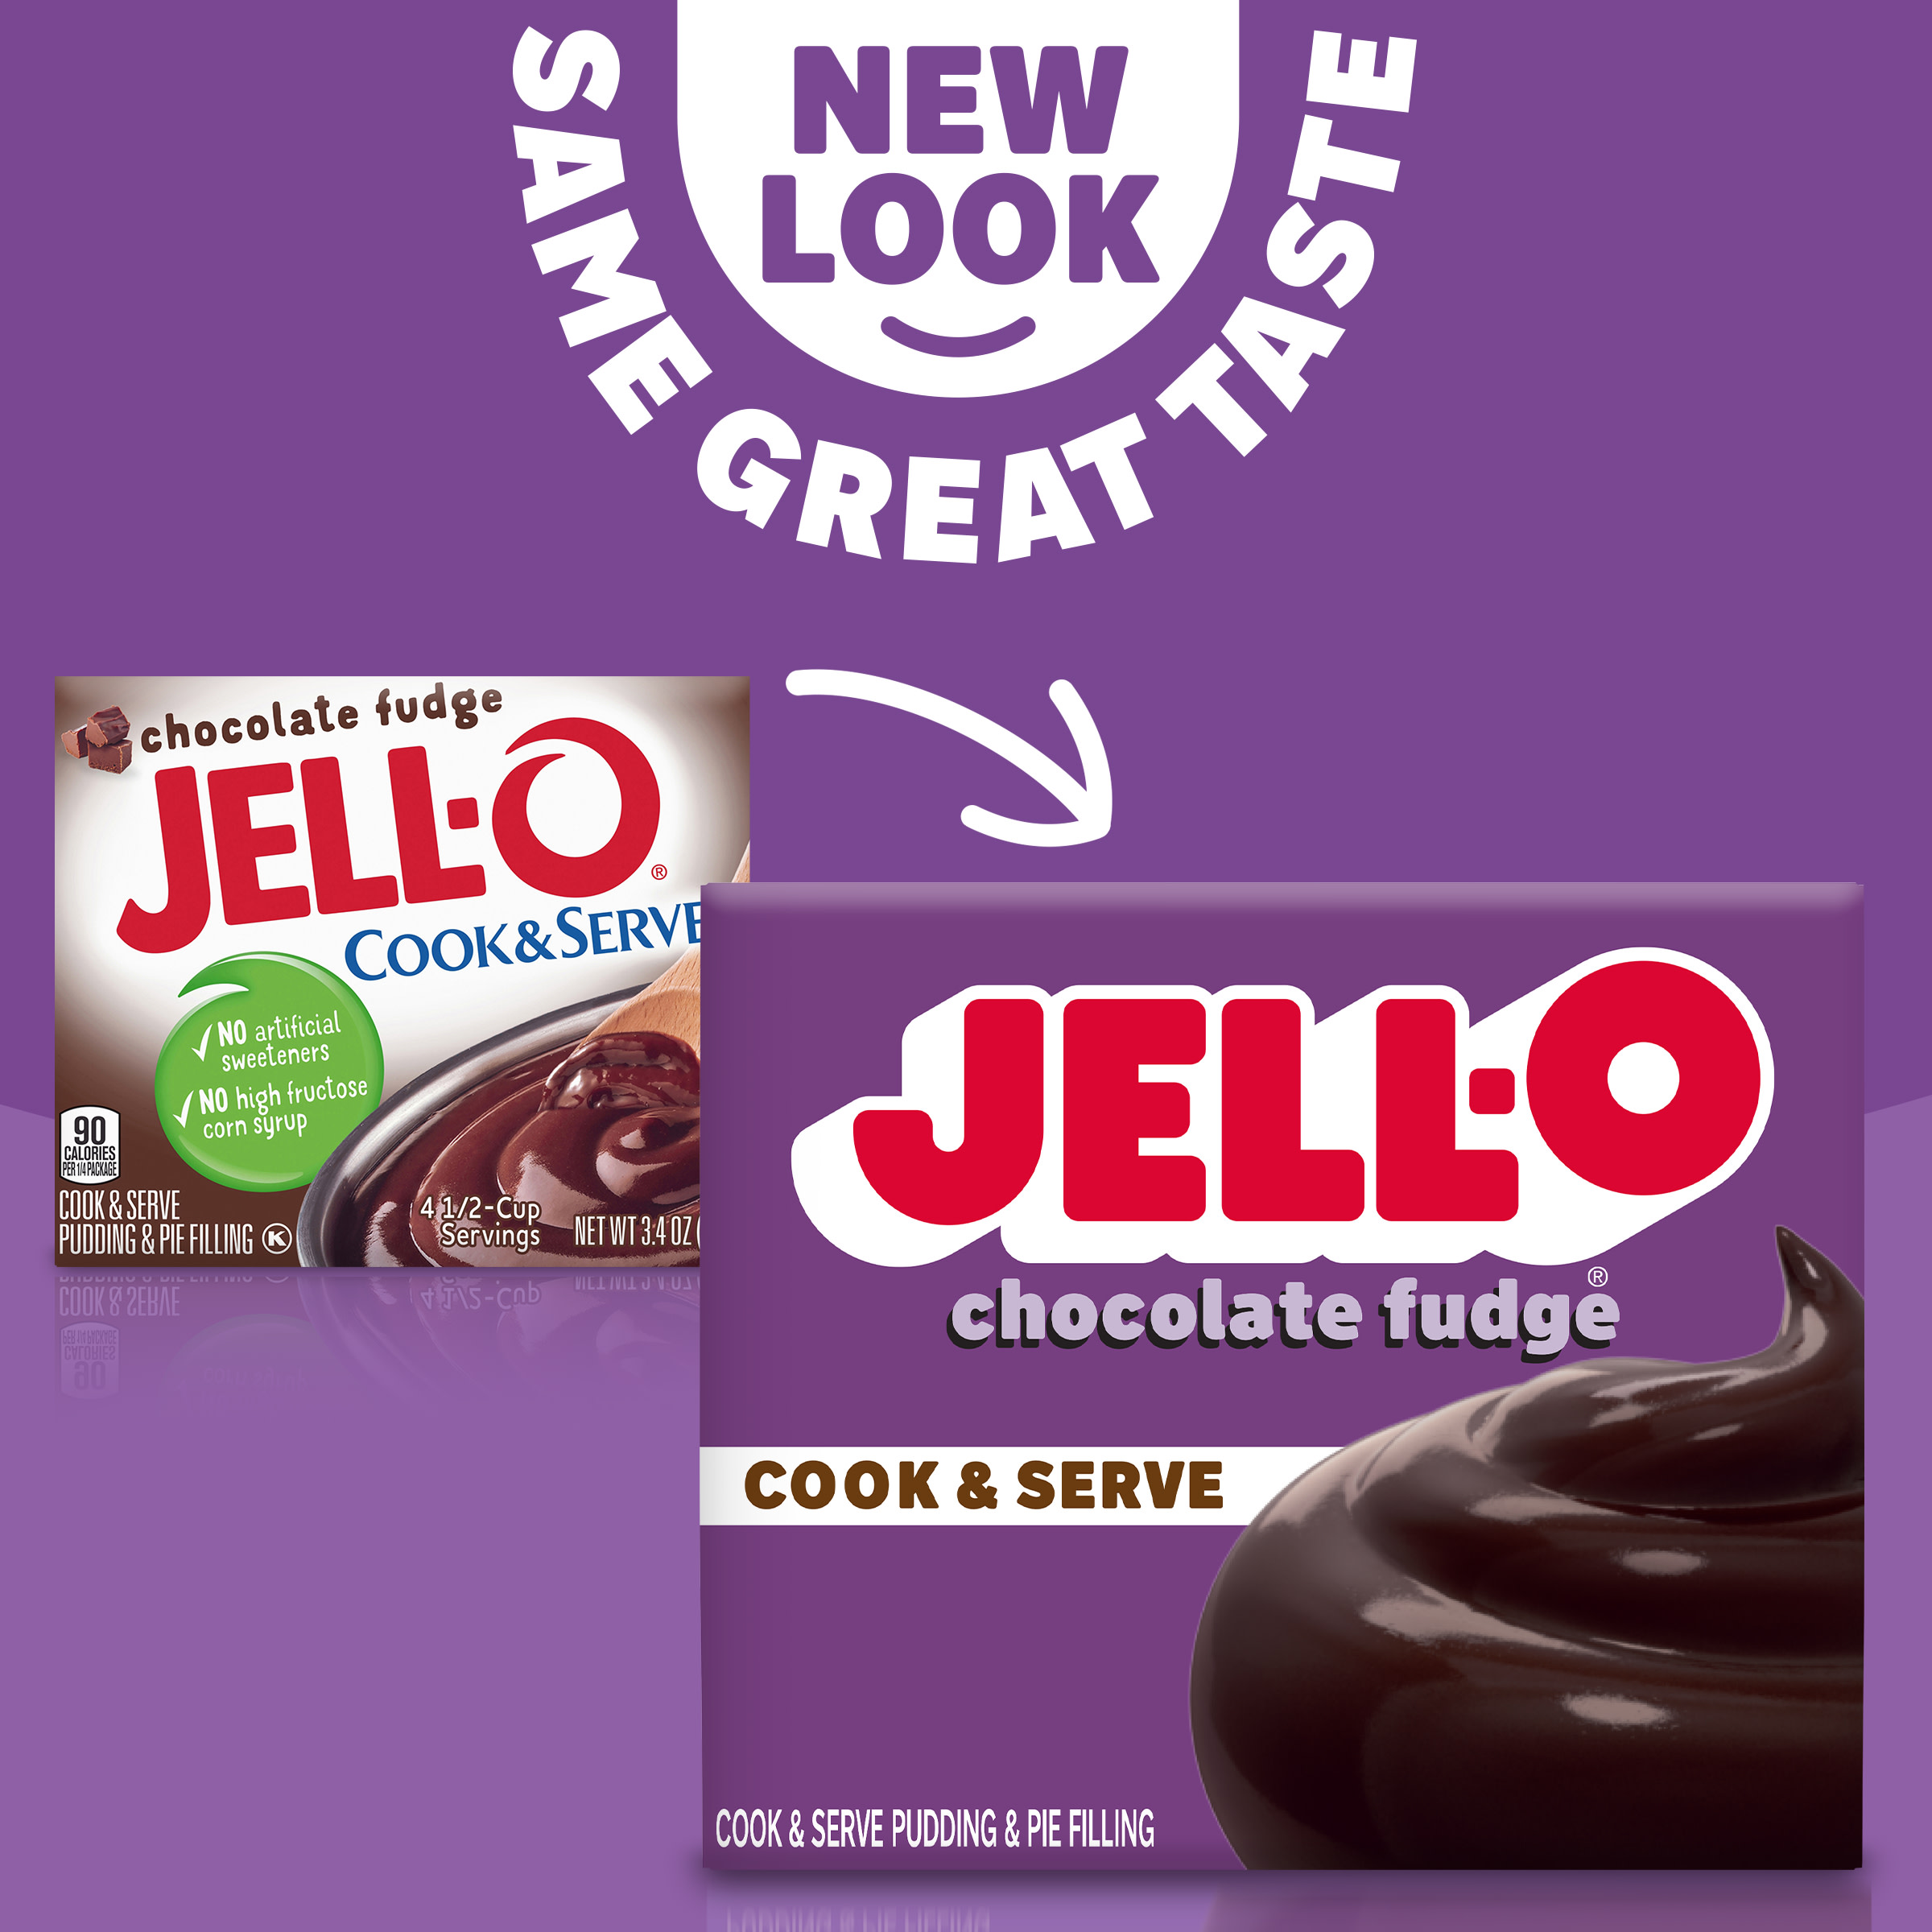 Jell-O Cook & Serve Chocolate Fudge Artificially Flavored Pudding & Pie Filling Mix, 3.4 oz Box - image 2 of 14